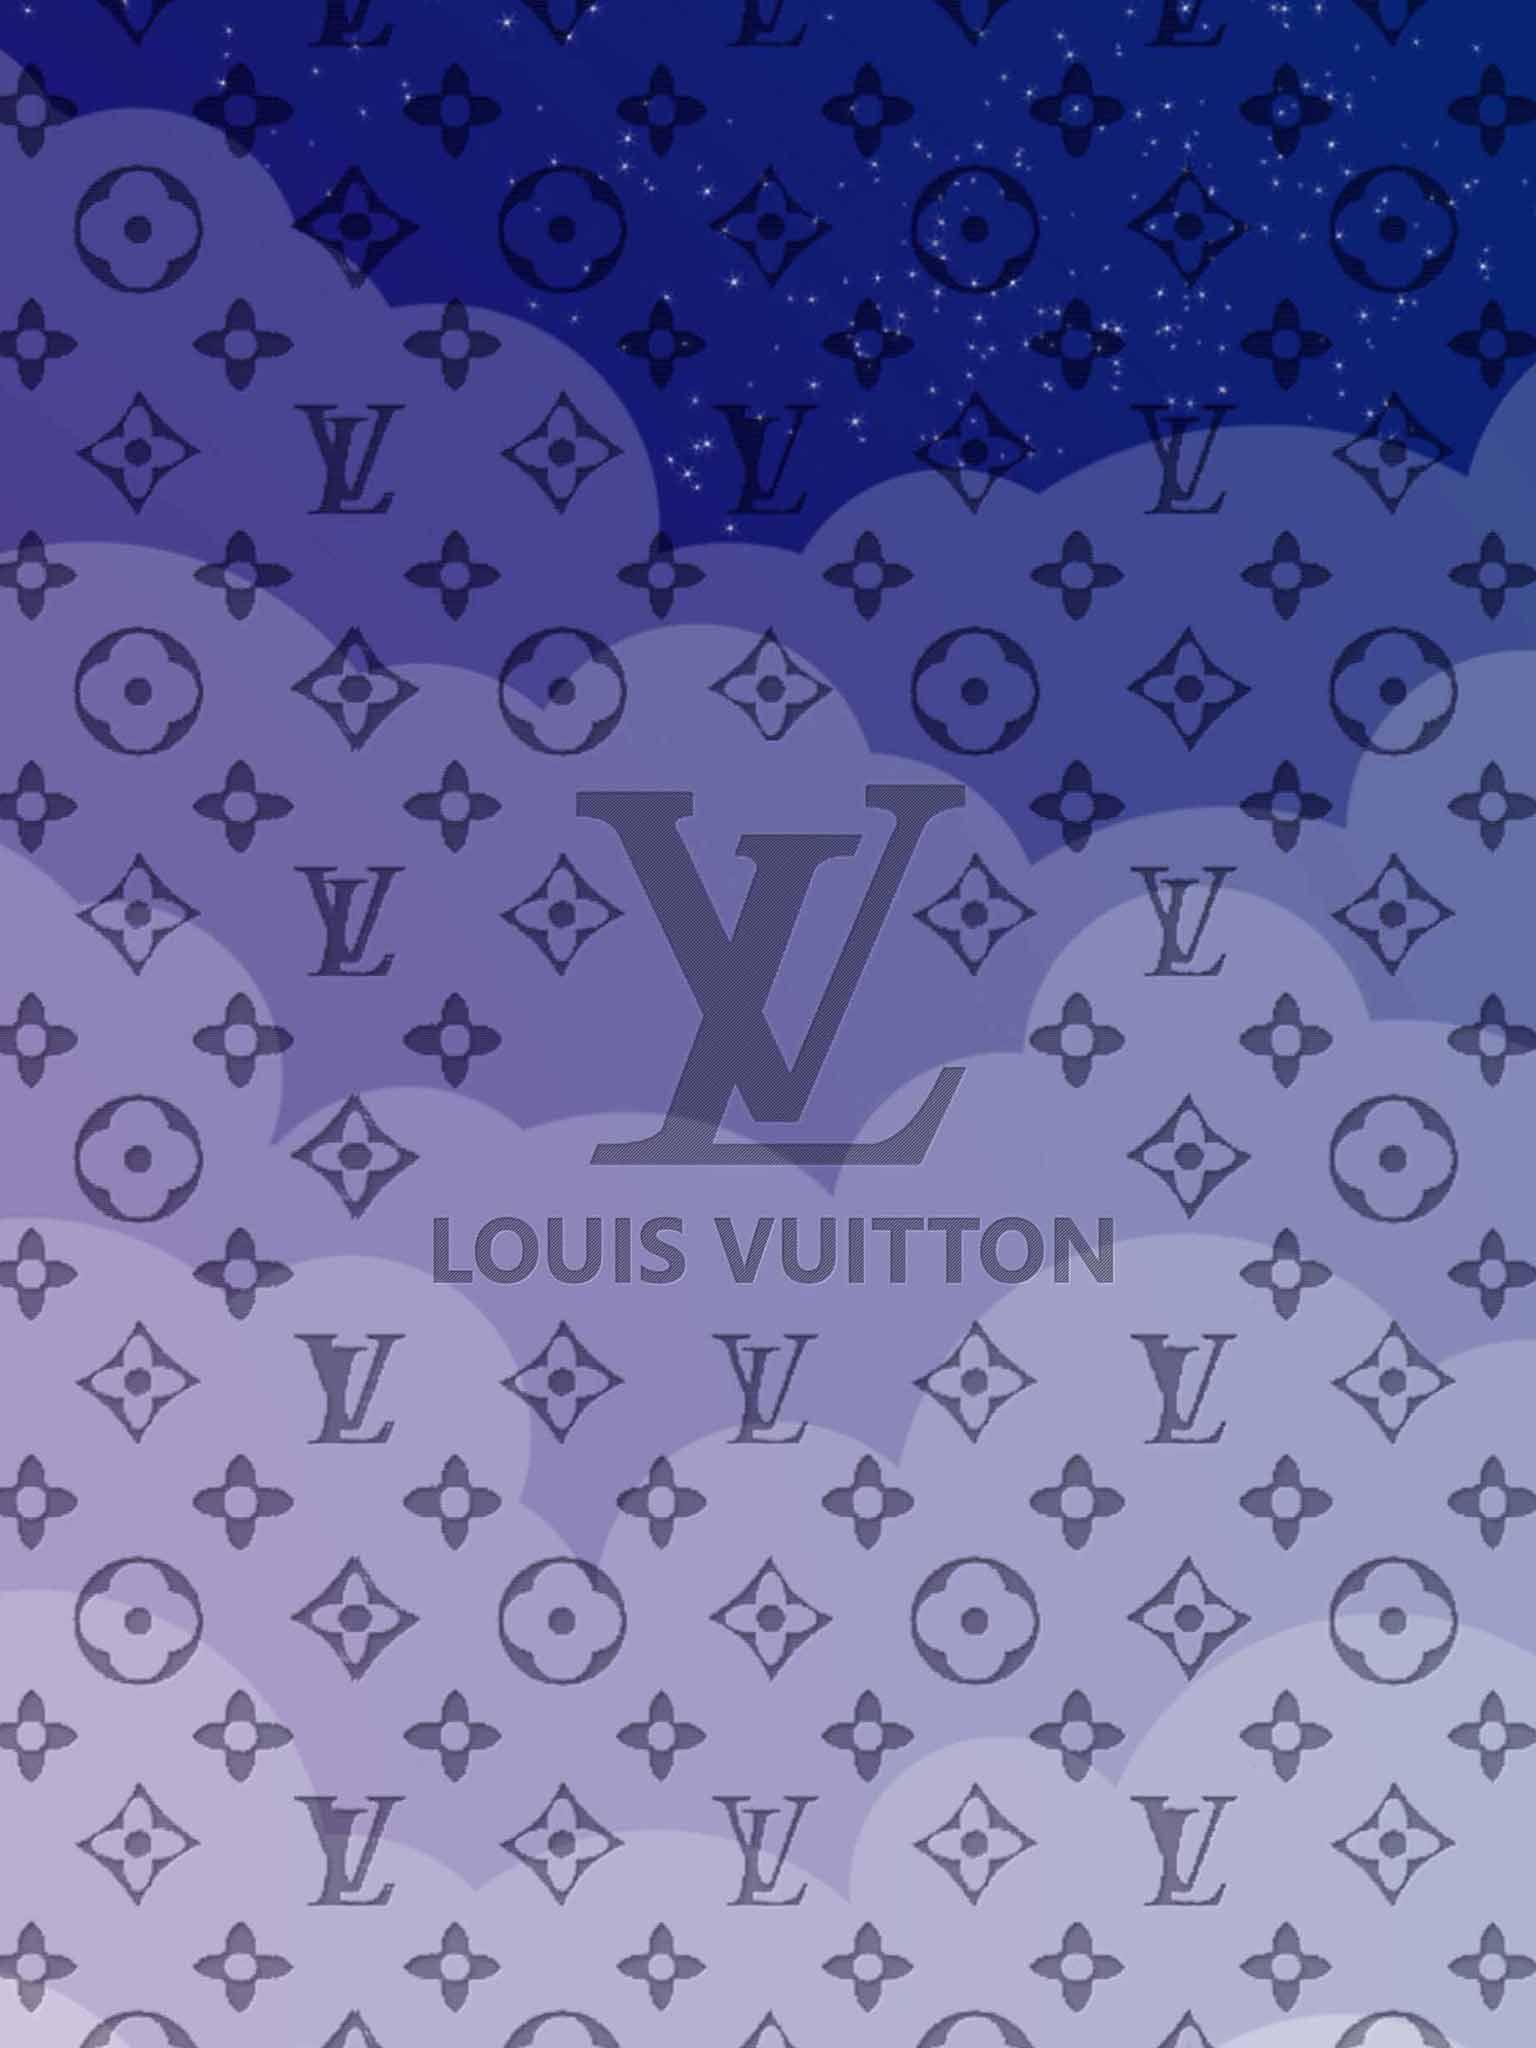 louis vuitton wallpapers for ipad